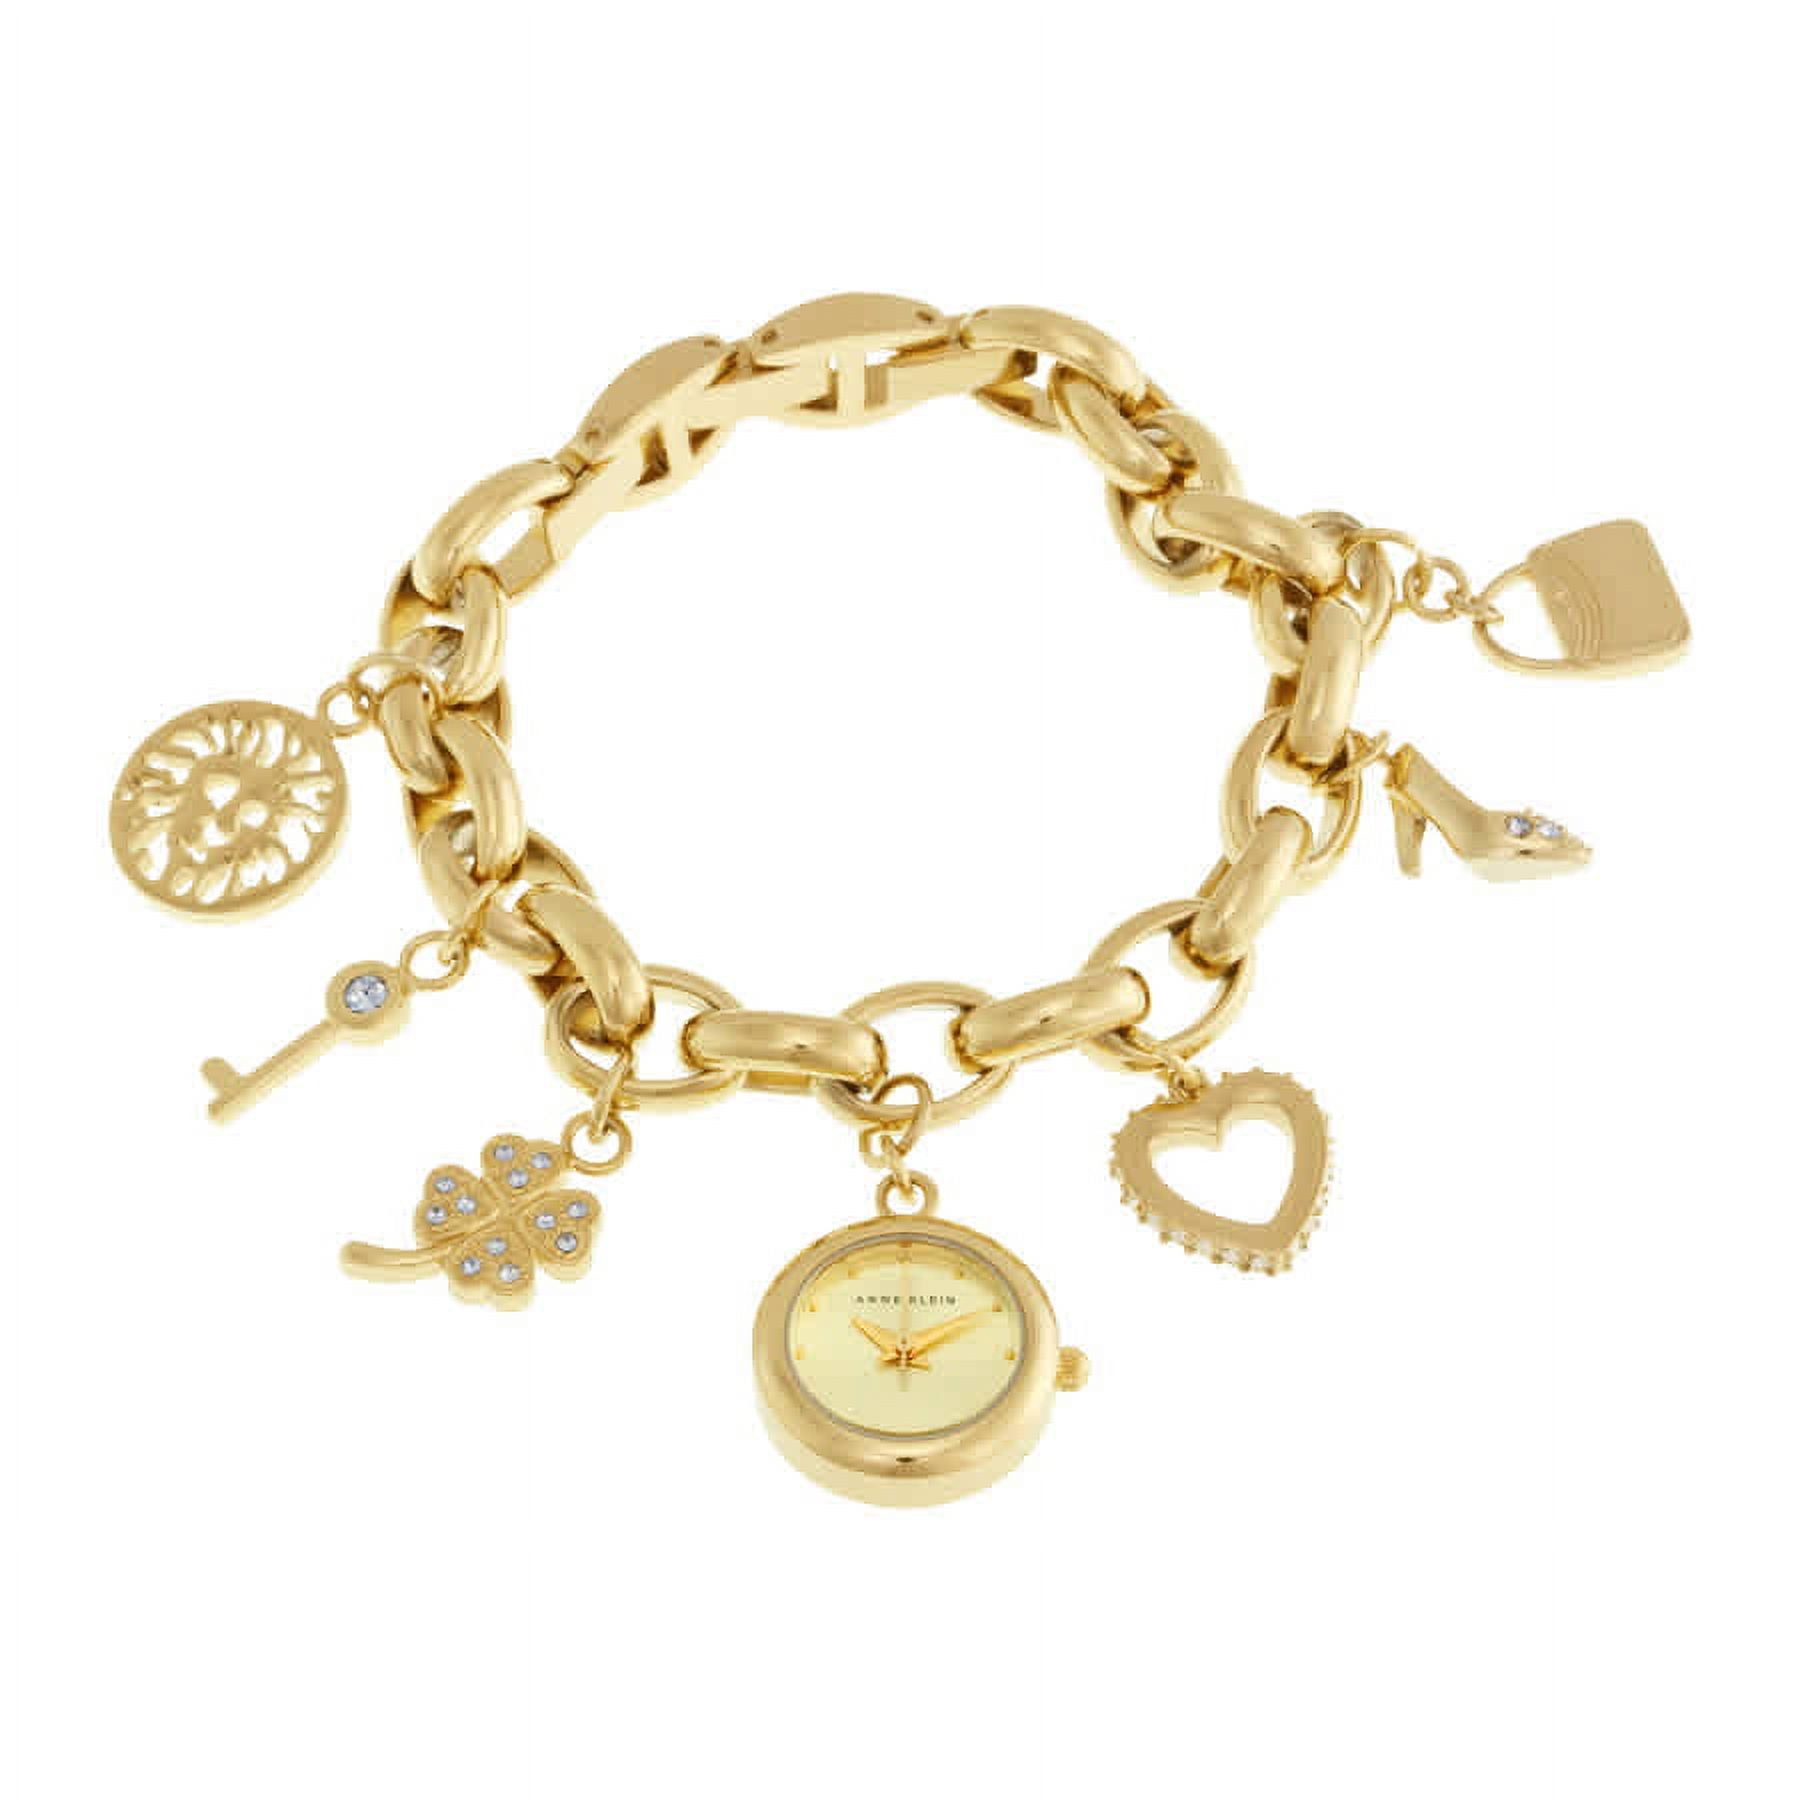 Anne Klein Charm Bracelet Watch 7604CHRM Gold Chain for Women, Women's  Fashion, Watches & Accessories, Watches on Carousell